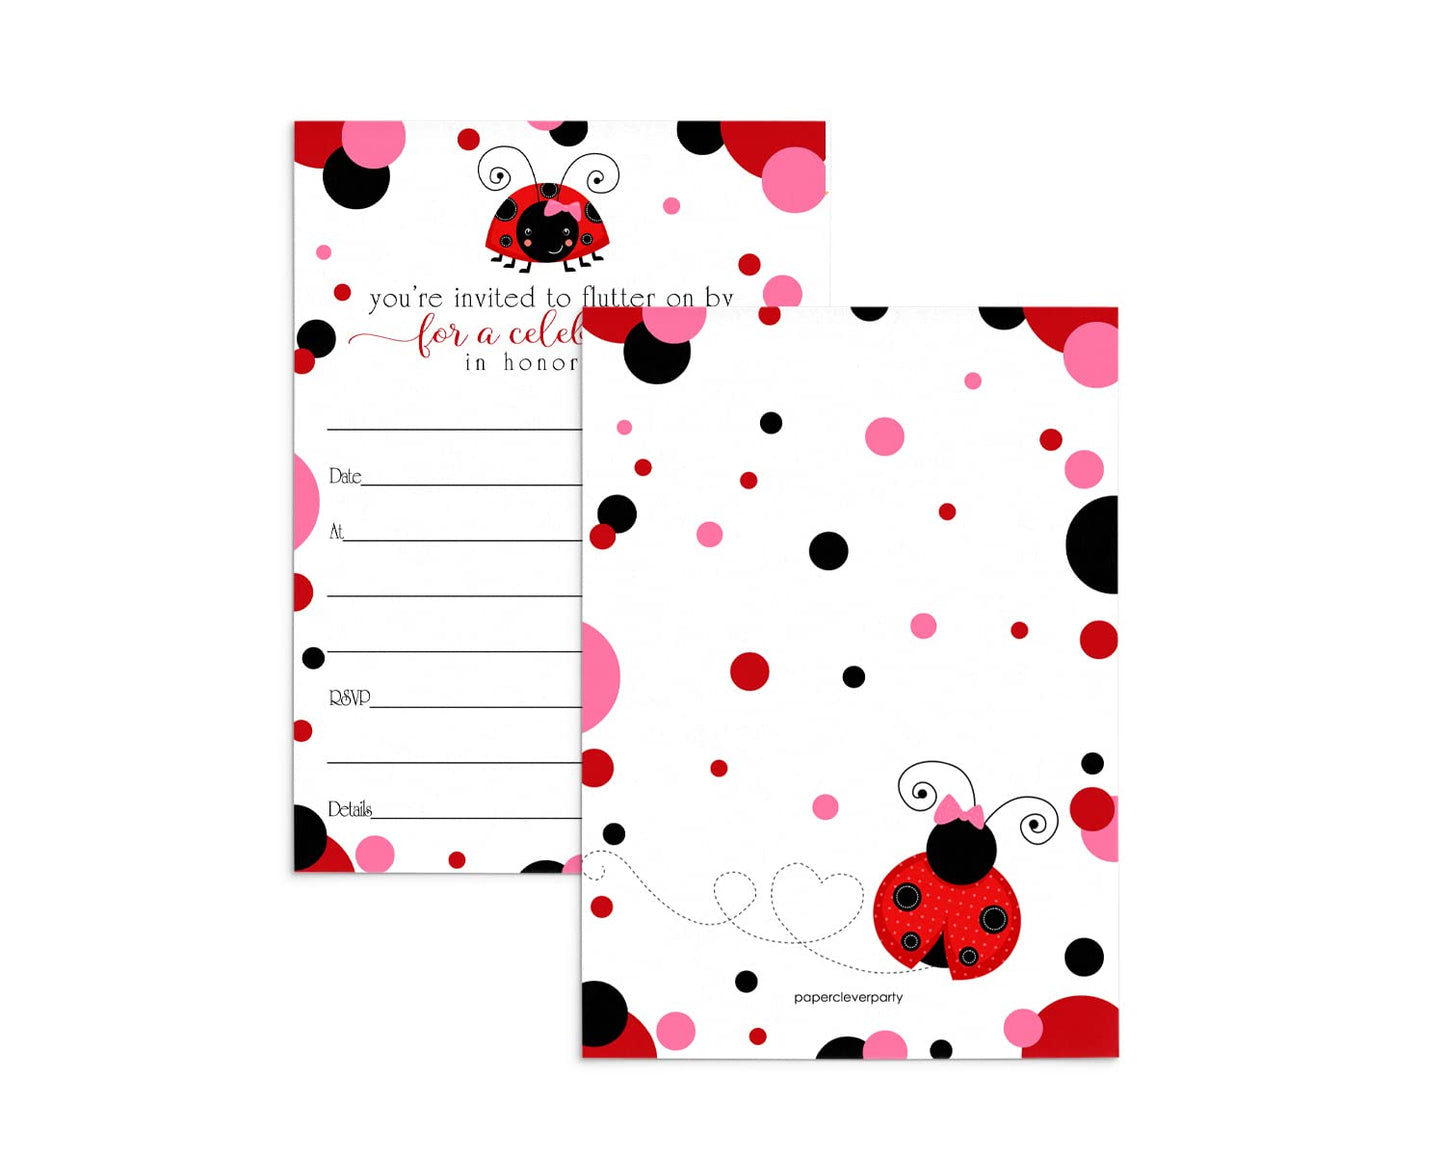 Paper Clever Party Ladybug InvitationsPaper Clever Party